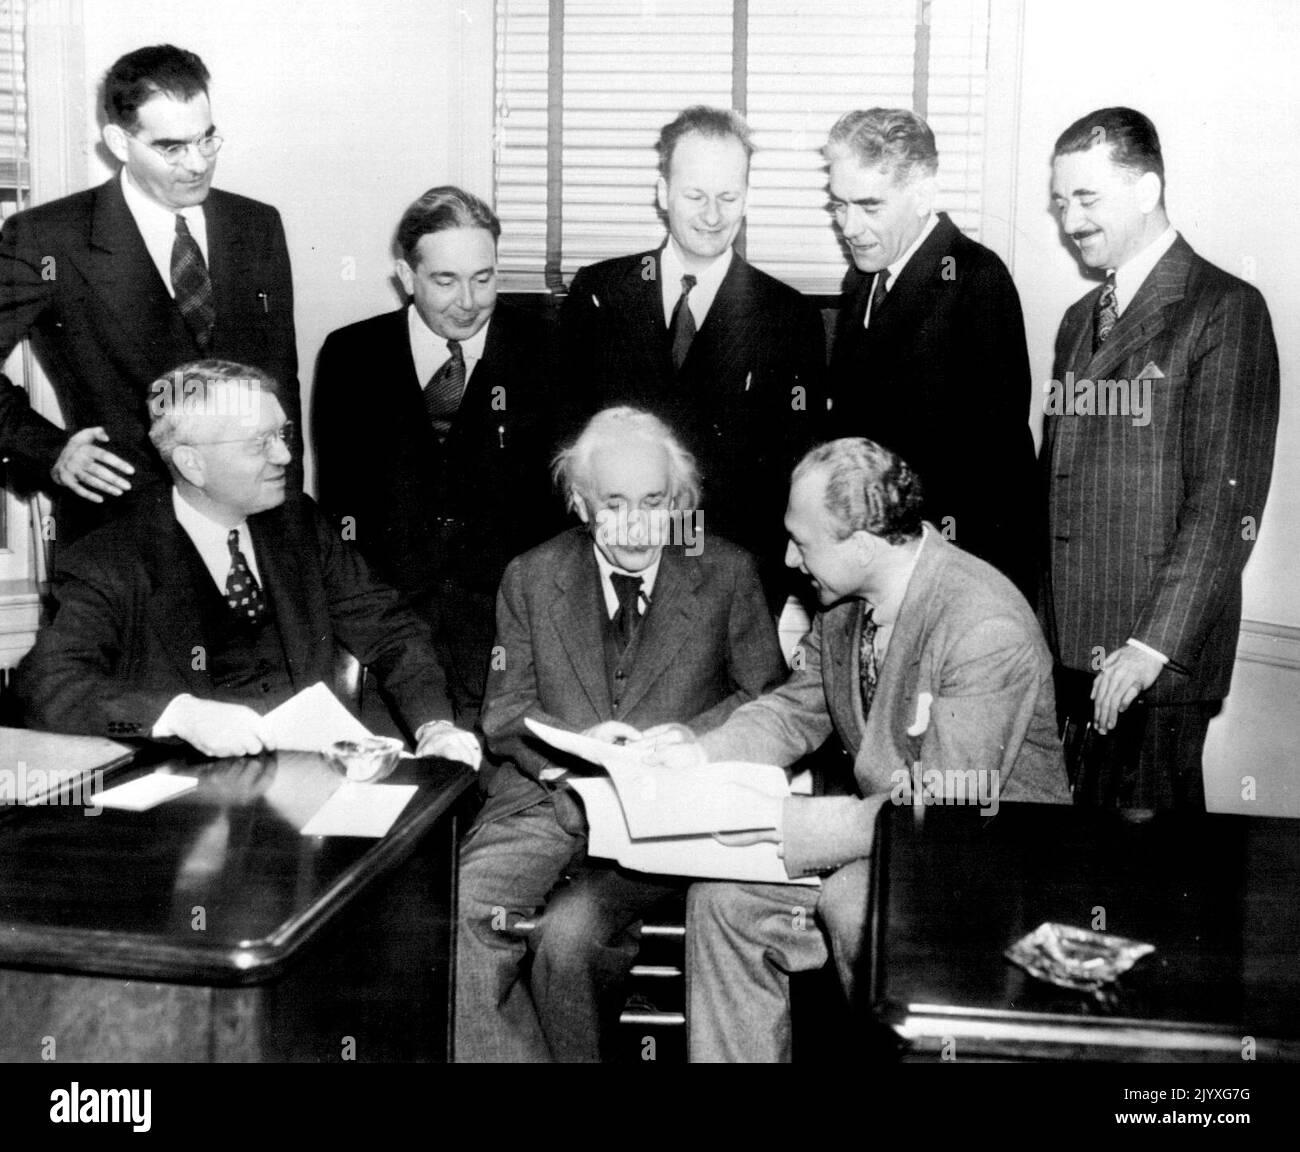 Atomic Scientists Meet - Members of Emergency Committee of Atomic Scientists discuss here today contents of their joint appeal issued for public subscription of $1,000, 000 to finance a nation-wide educational campaign on social implications of atomic energy Left to right are: Seated, Harold C. Urey, Univ. of Chicago, Prof. Albert Einstein; Selig Hecht, Columbia University; standing, Victor F. Weisskopf, Massachusetts. Institute of Technology; Lee S. Szilard, Univ.of Chicago; Hans A. Bethe, Cornell University; Thorfin R. Hogness, Univ. of Chicago and Philip M. Morse, on leave from M.I.T. Novem Stock Photo